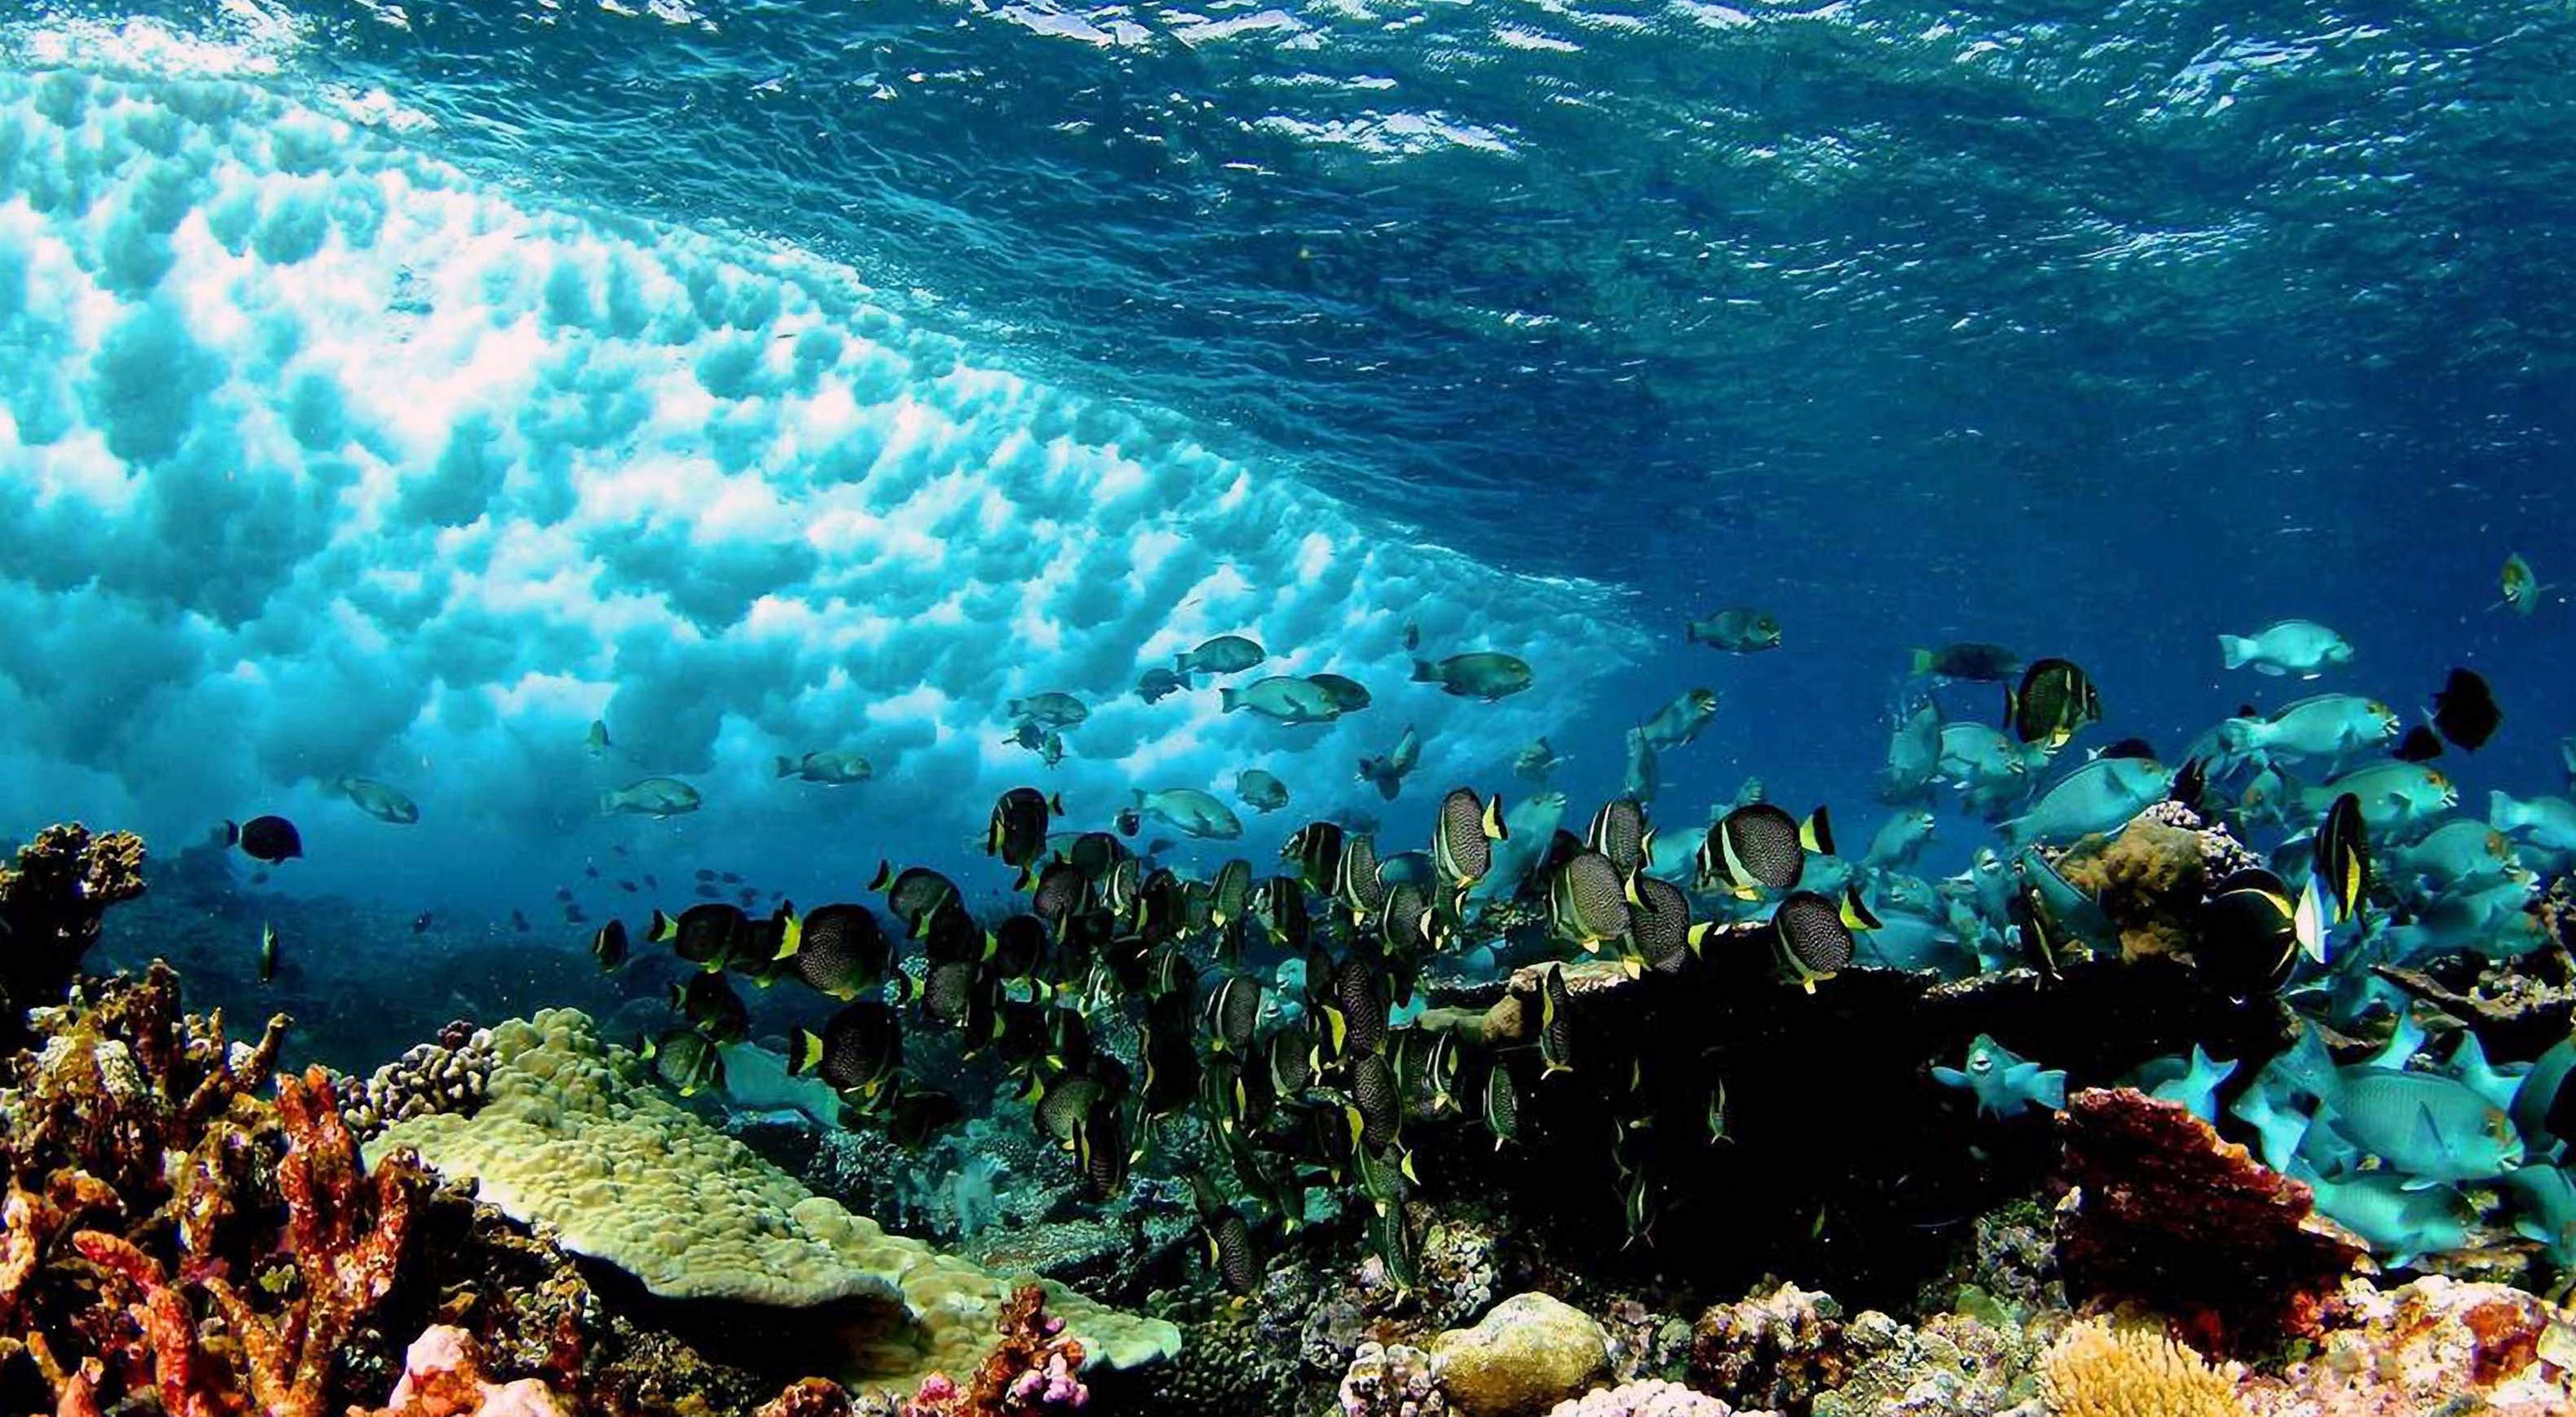 Colorful fish swim over a coral reef as a wave crashes through the water's surface.